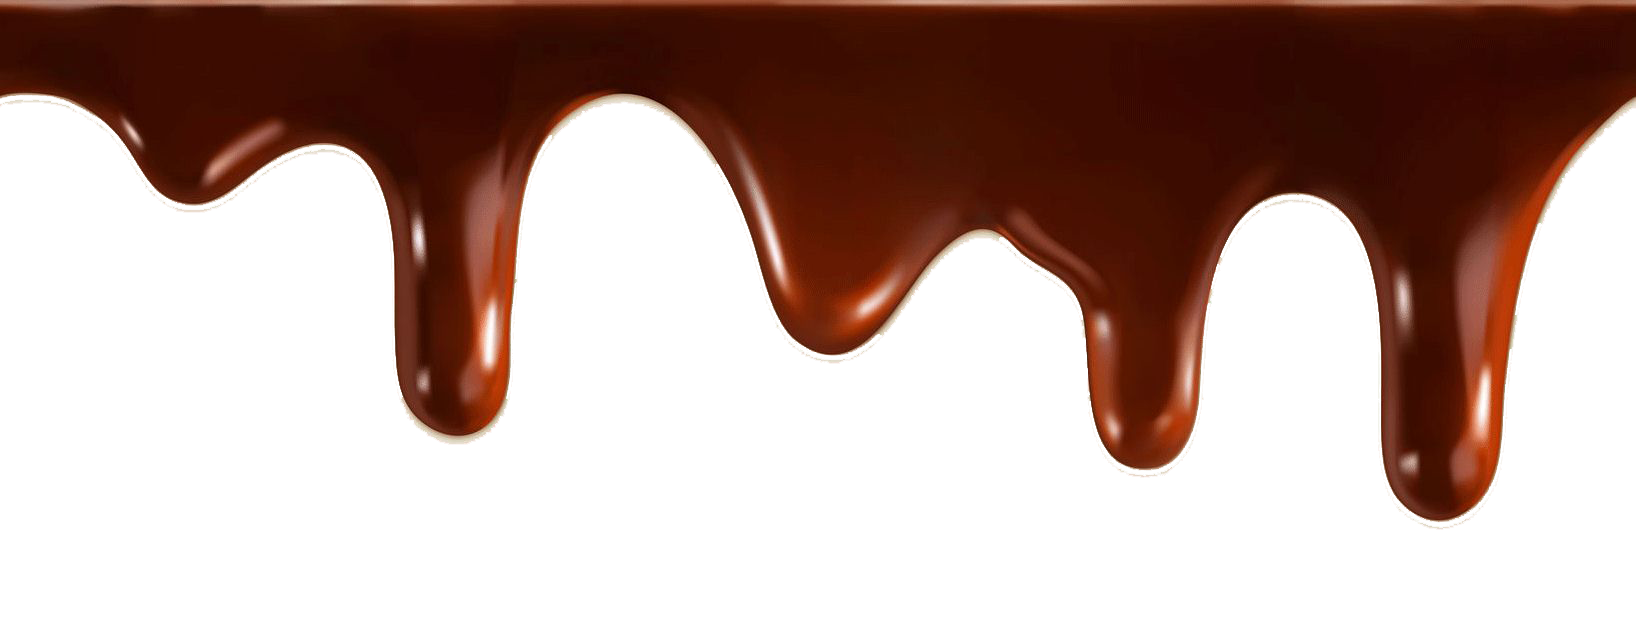 Melted Chocolate Transparent Image PNG Image